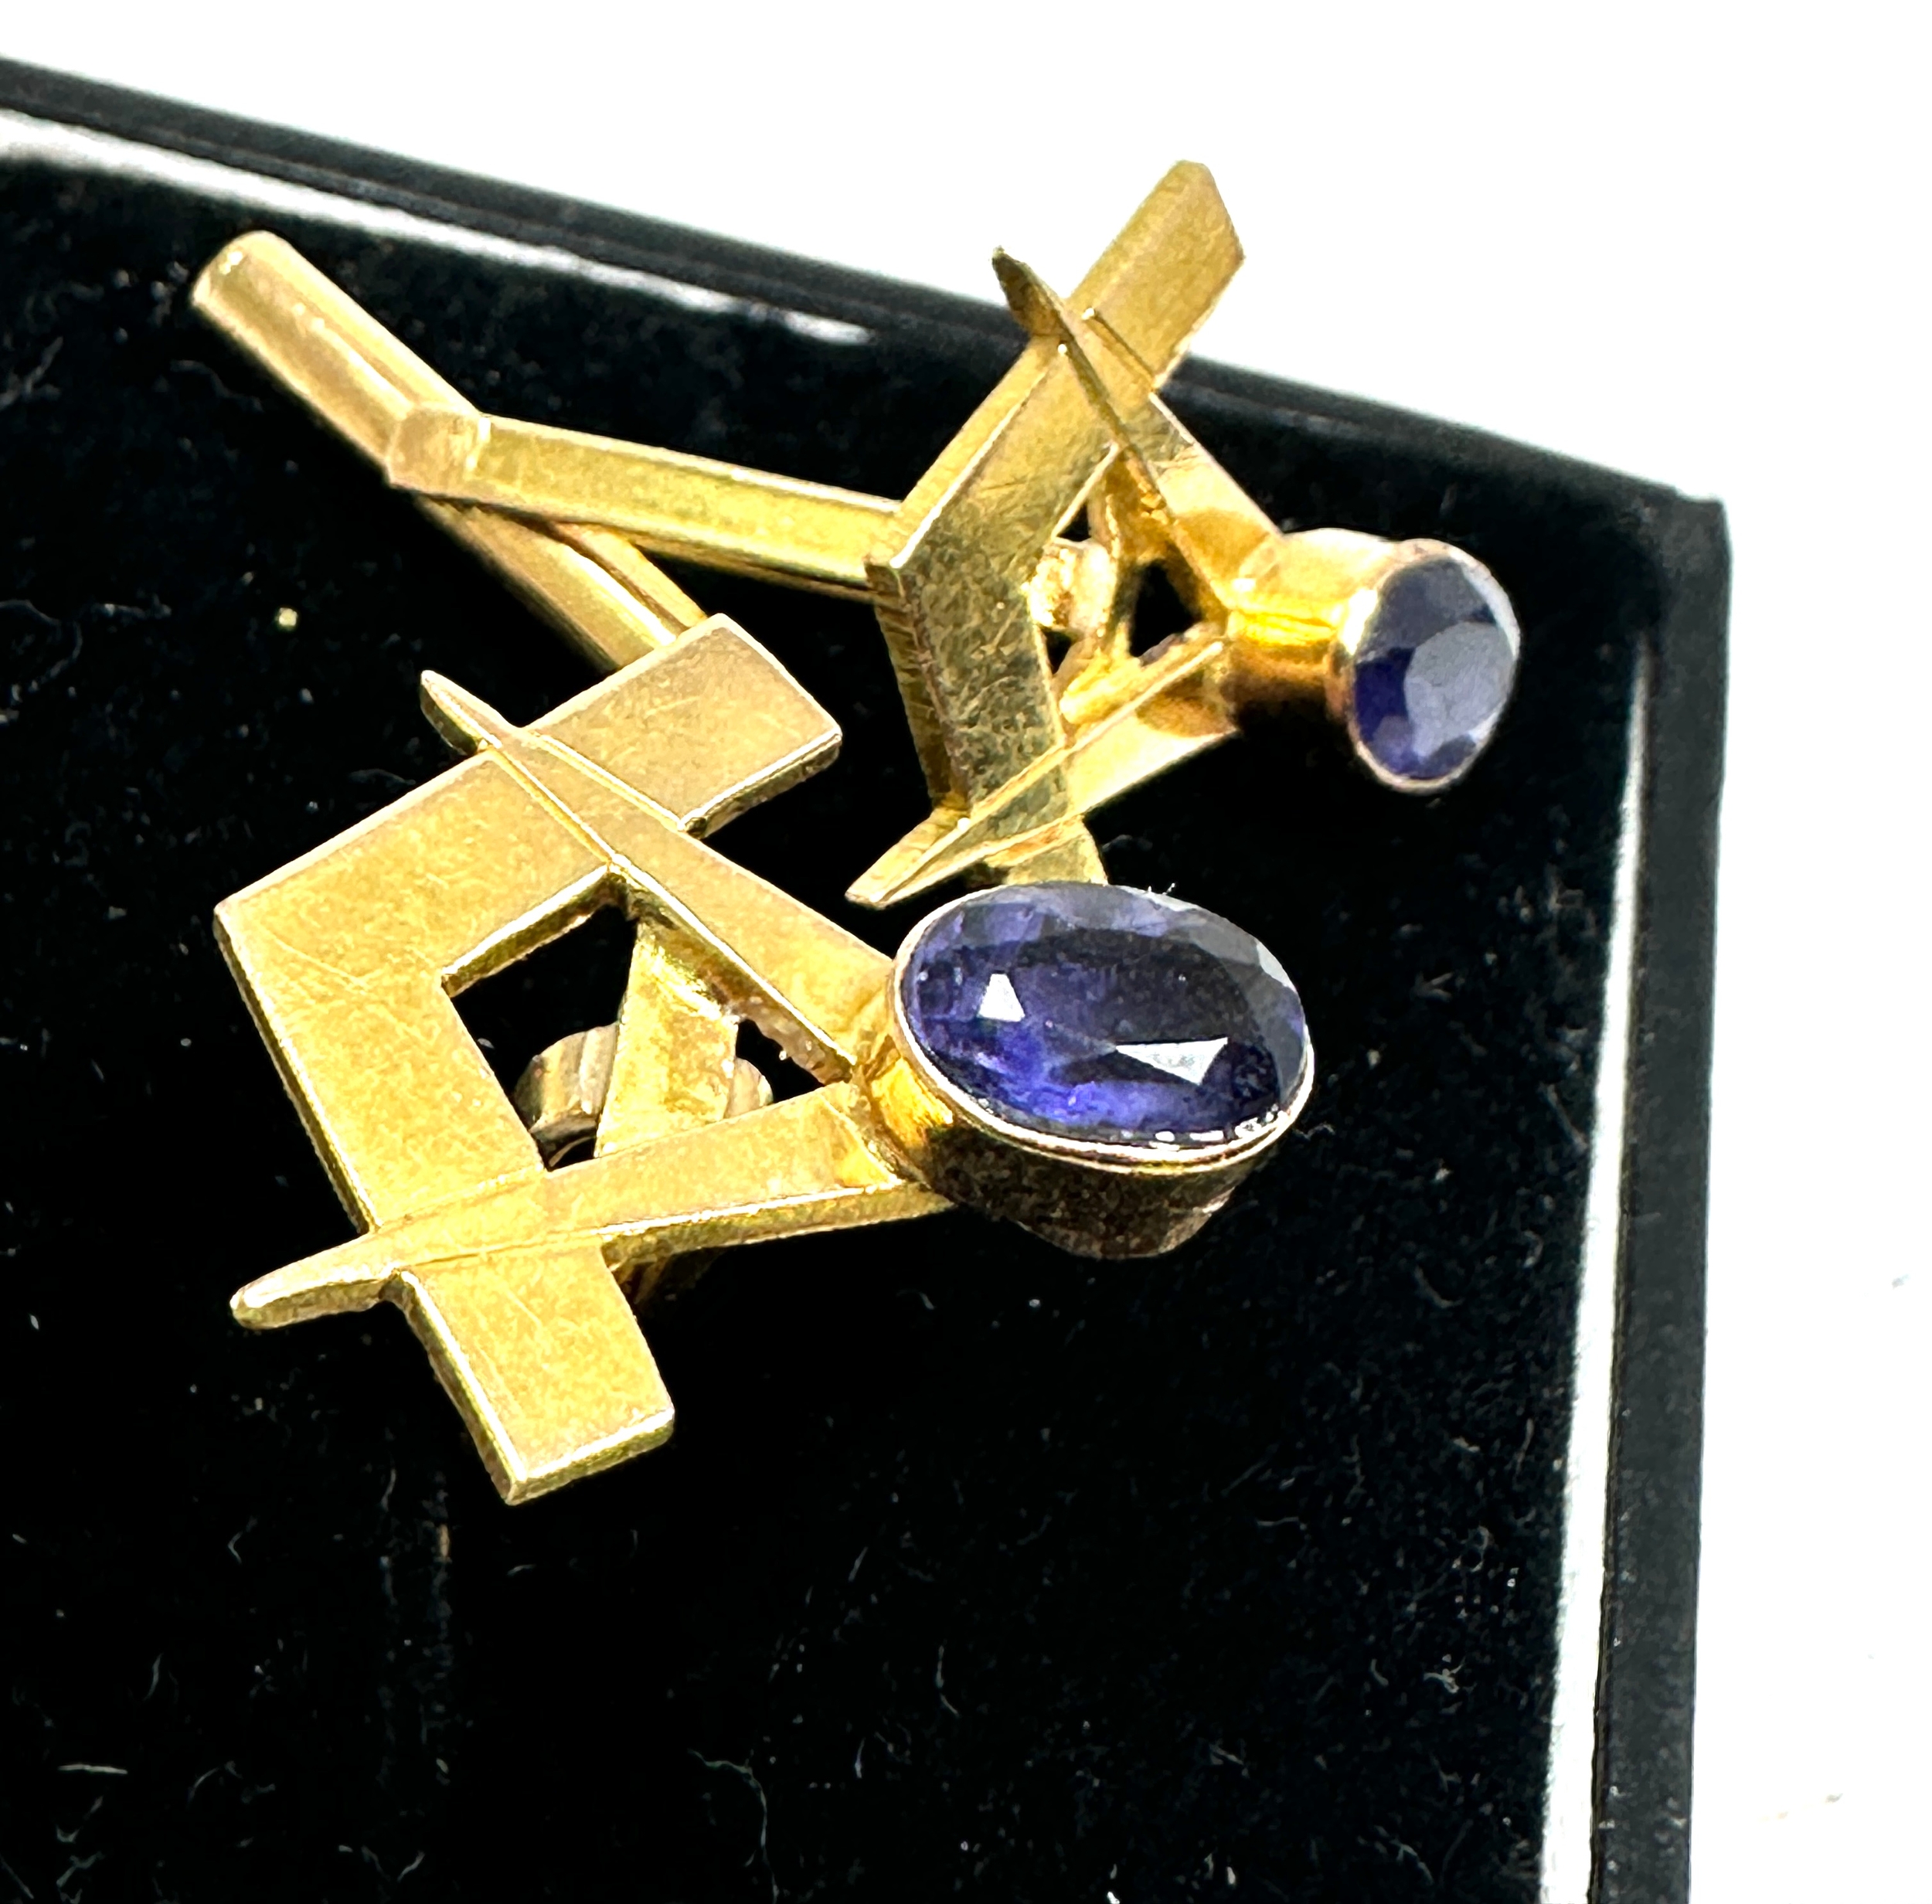 18ct gold & sapphire masonic cufflinks weight 5.5g xrt tested as 18ct gold - Image 3 of 3